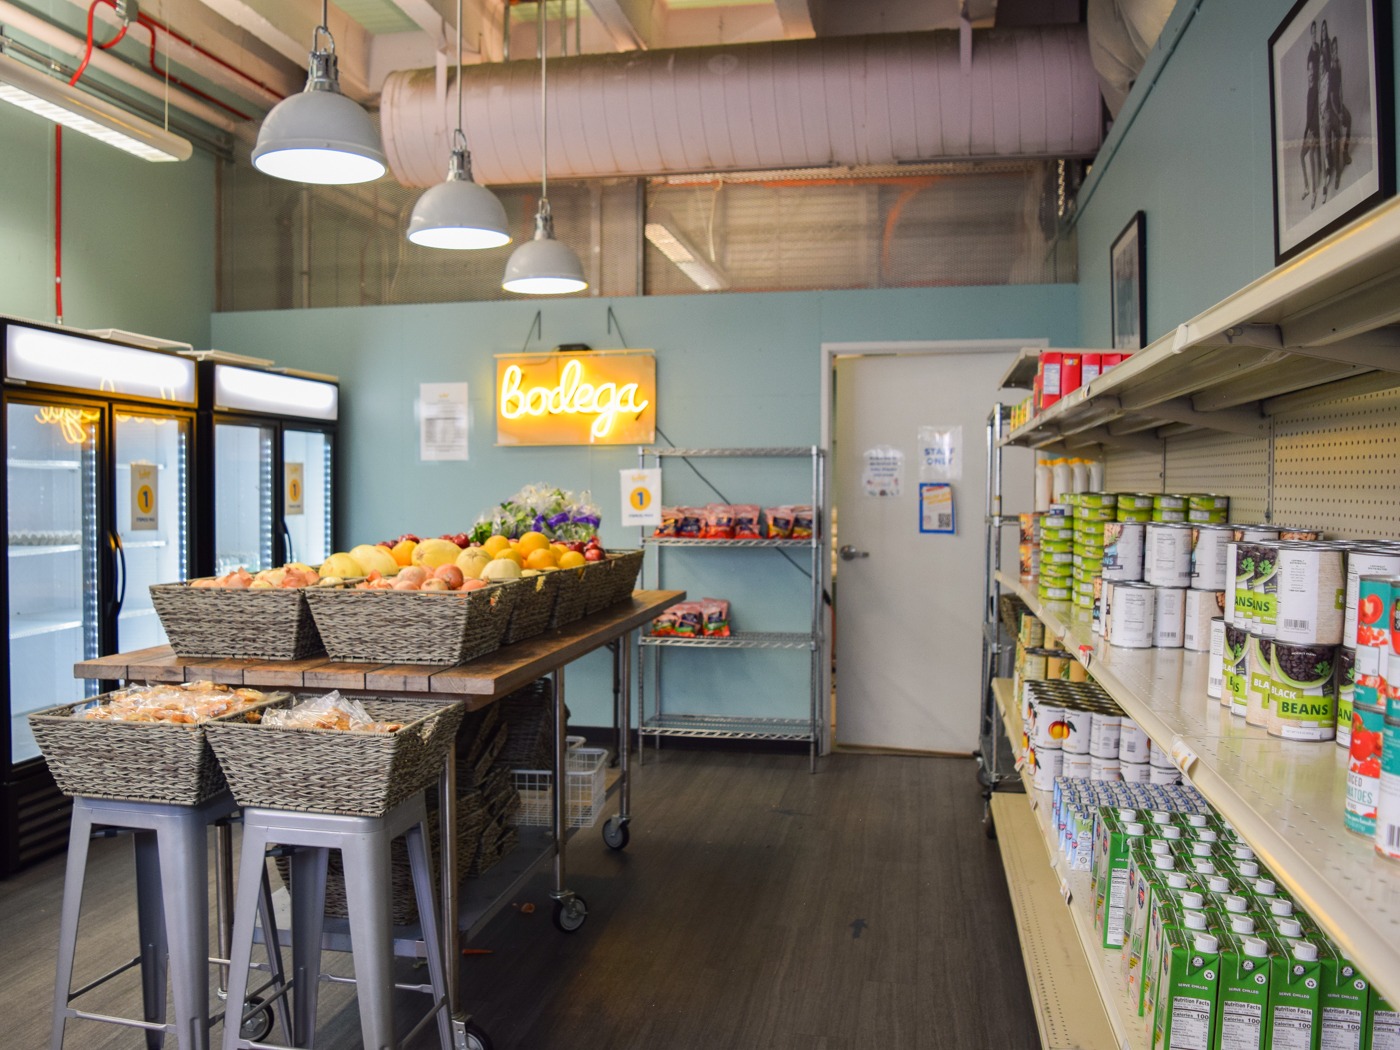 Bodega, the on-campus food pantry at Santa Monica College, is one of Swipe Out Hunger’s partners and provides a variety of food items, prepared meals, and referrals to resources.